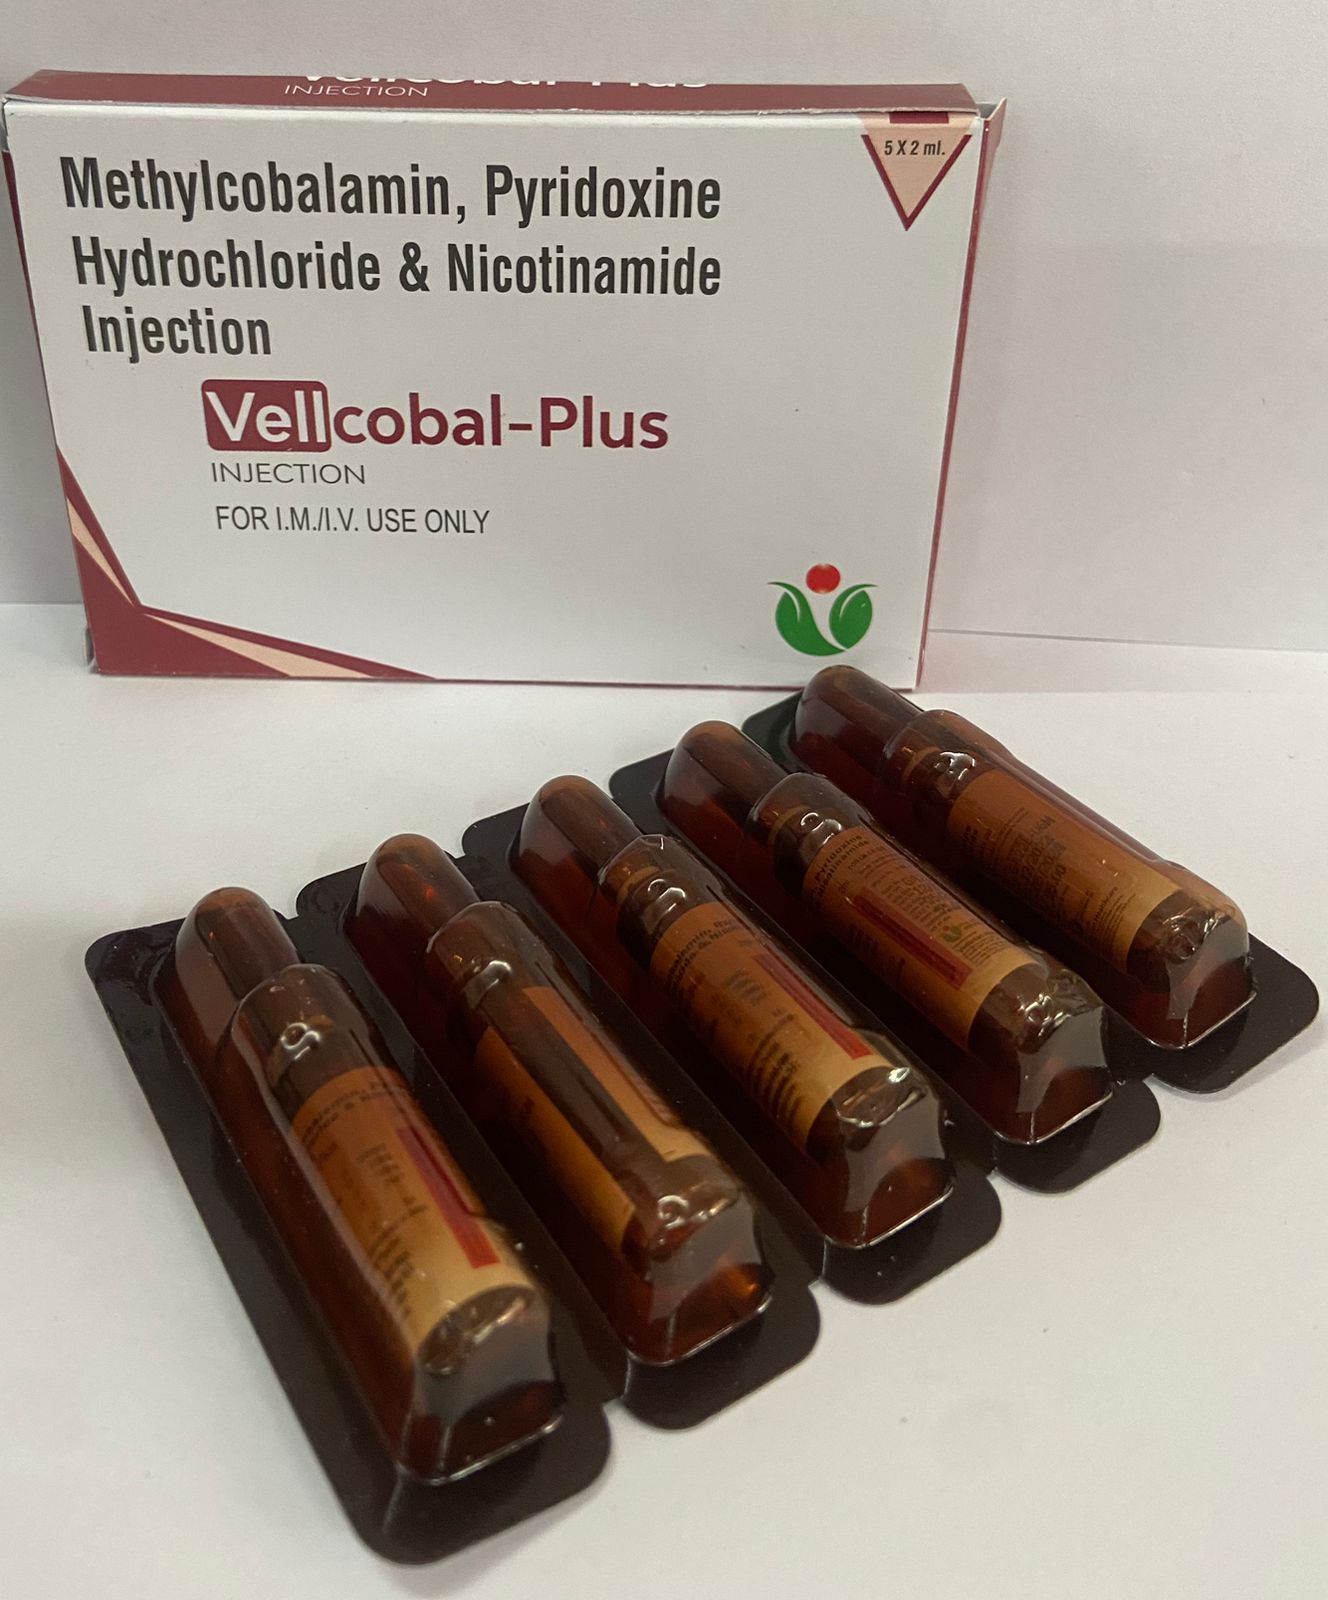 Product Name: Methylcobalamin Pyridoxine Hydrochloride and Nicotinamide Injection, Compositions of Methylcobalamin Pyridoxine Hydrochloride and Nicotinamide Injection are Methylcobalamin,Pyridoxine Hydrochloride & Nicotinamide Injection - Orison Pharmaceuticals